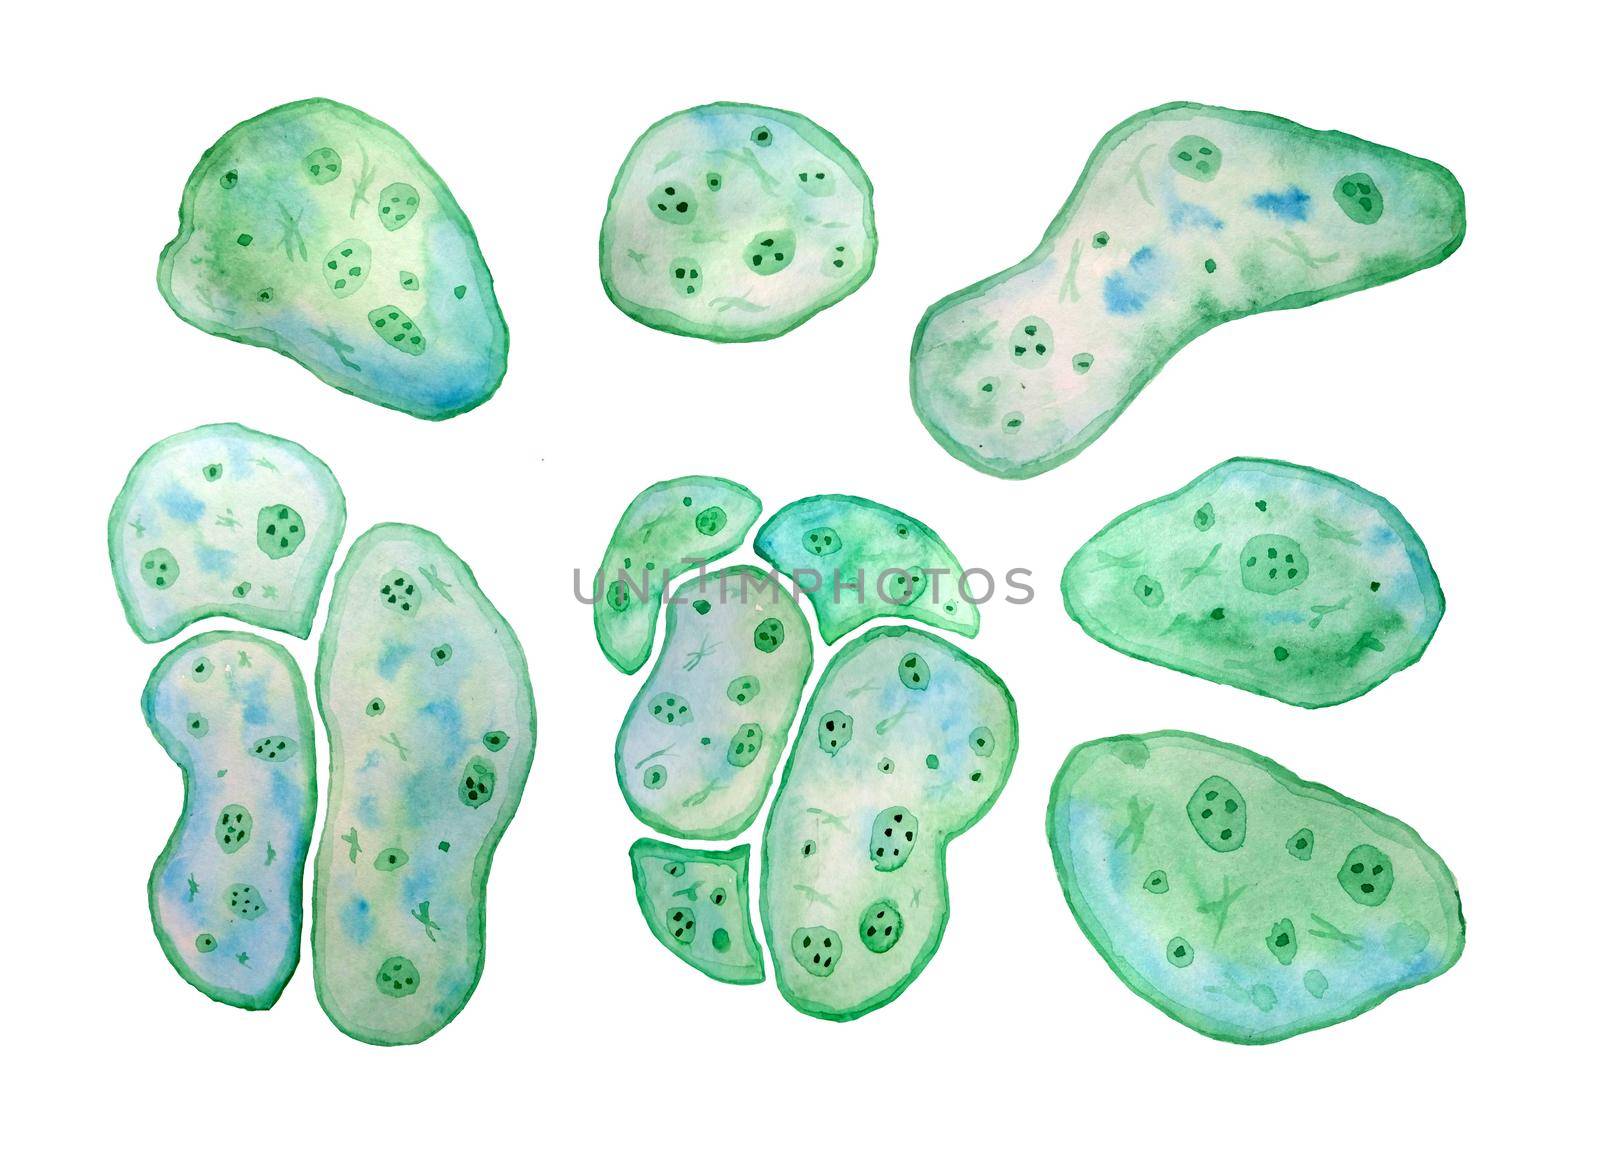 Unicellular green blue algae chlorella spirulina with large cells single-cells with lipid droplets. Watercolor illustration of macro zoom microorganism bacteria for cosmetics biological biotech design